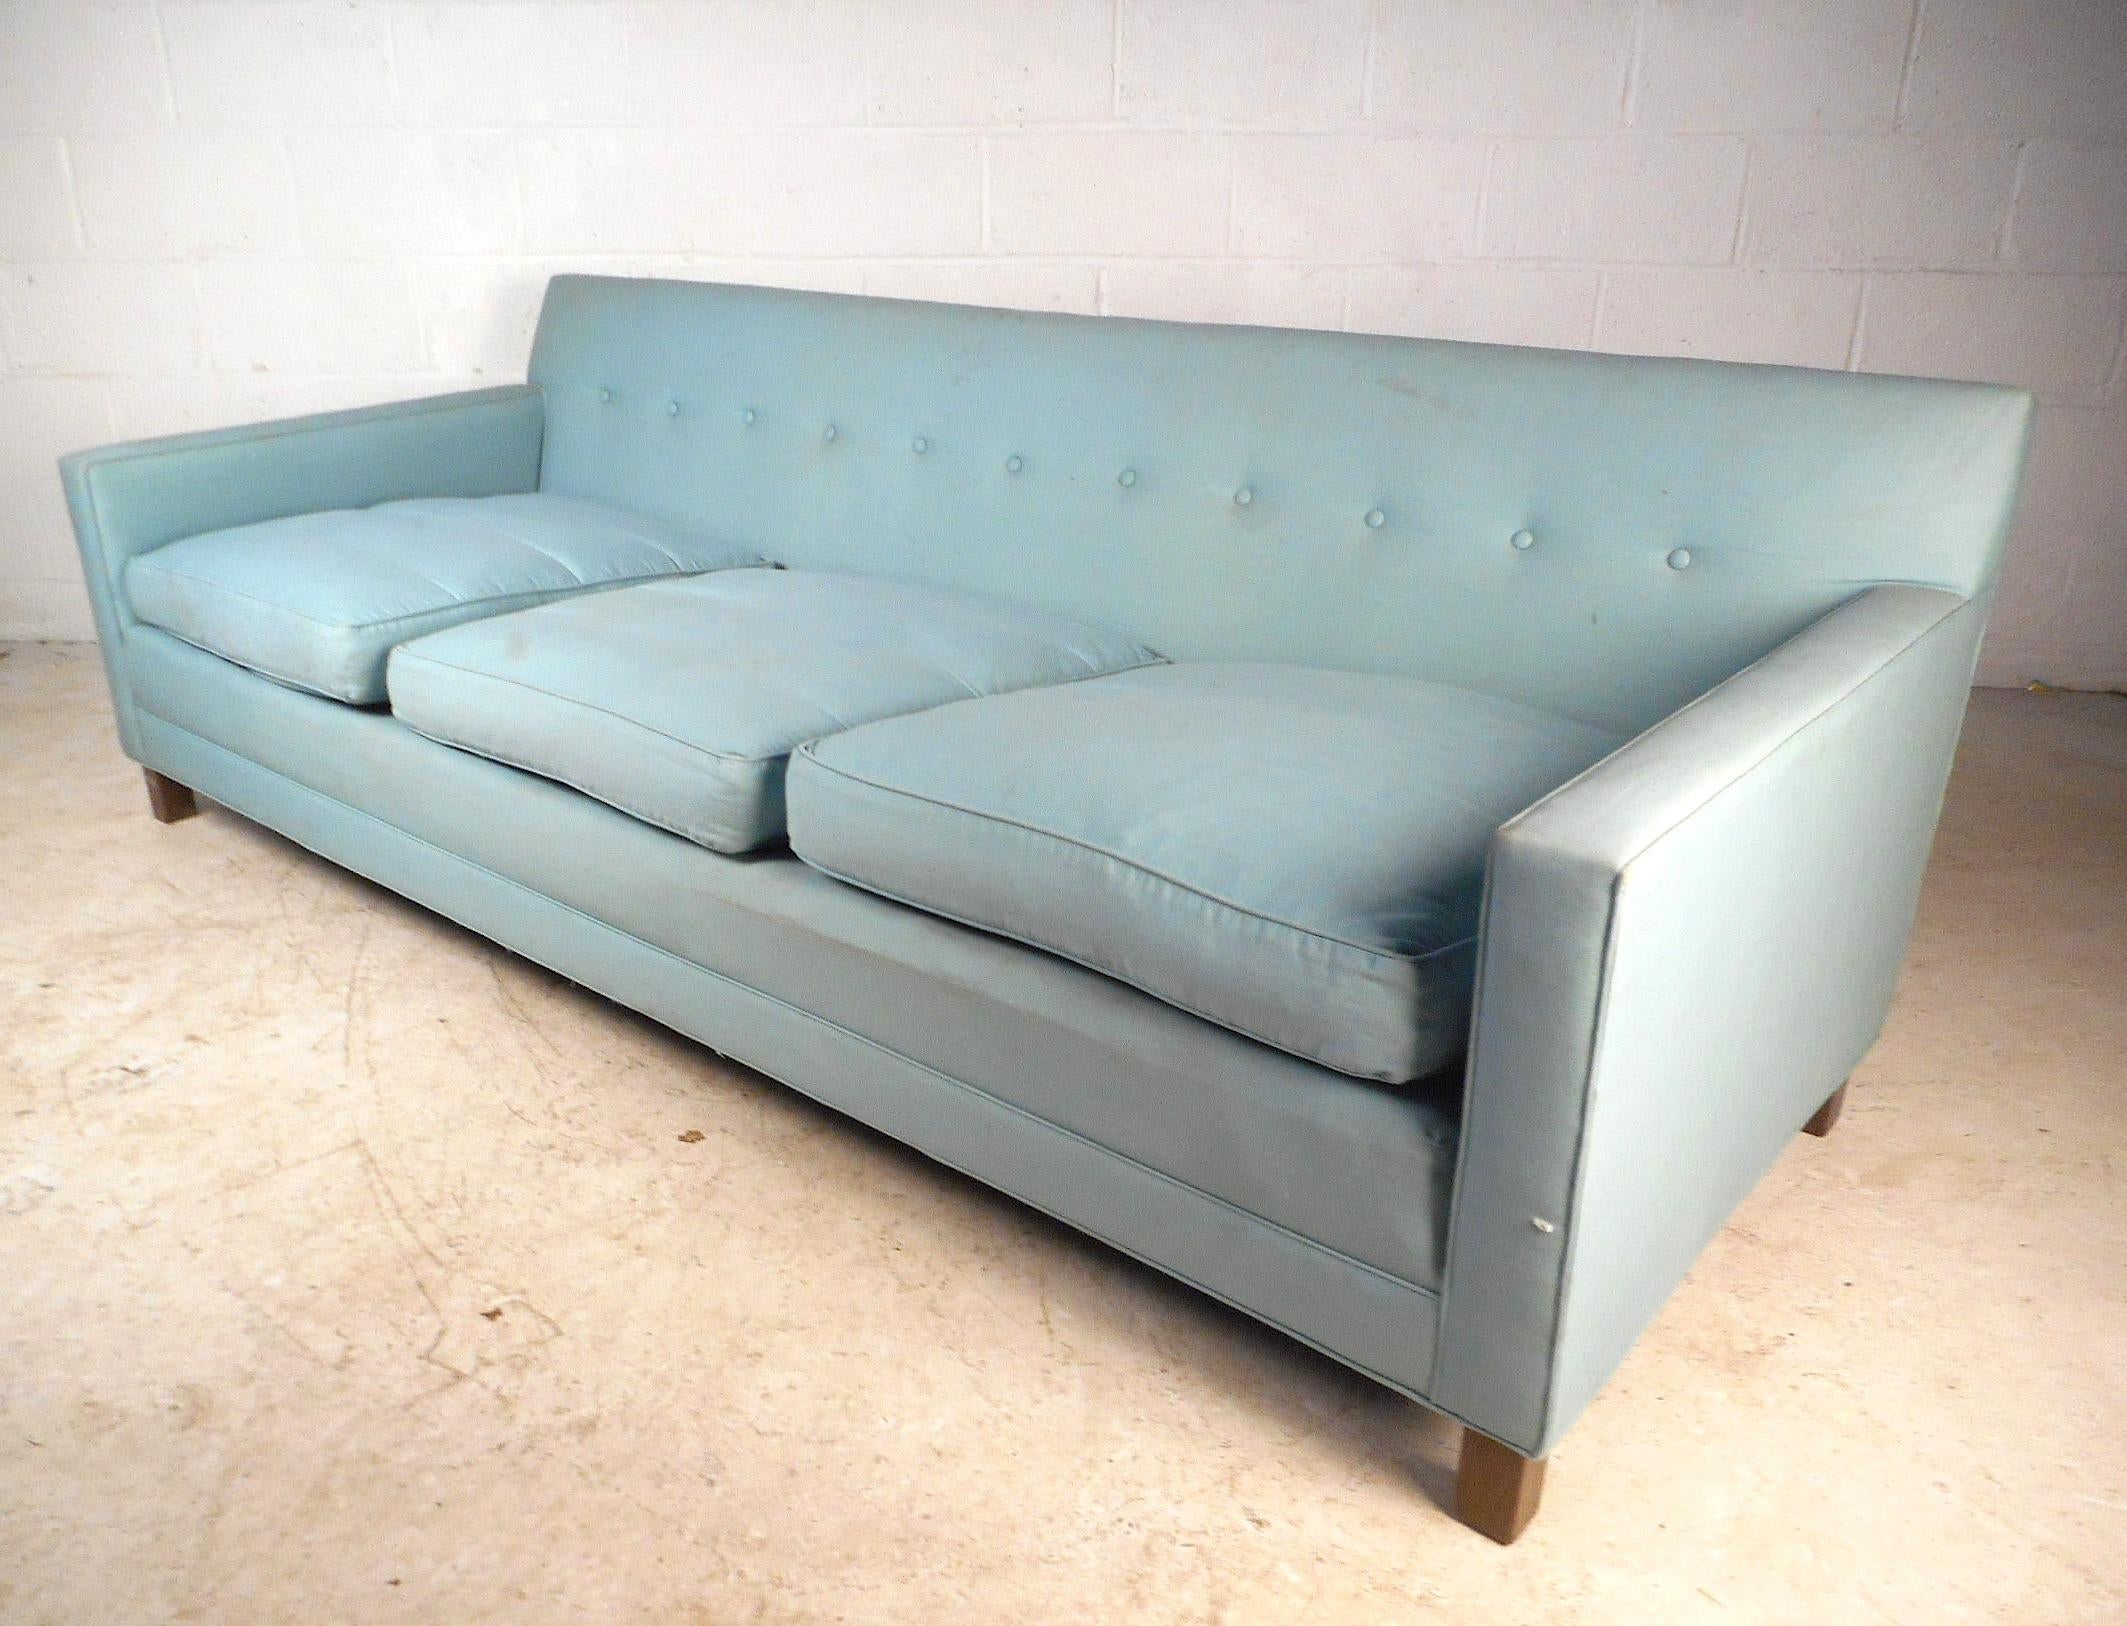 This Mid-Century Modern sofa by Dunbar features a uniformly tufted back and loose cushions. Sturdy walnut legs ensure stability while complimenting the sky blue upholstery. This sofa makes the perfect addition to any seating arrangement, circa 1960.